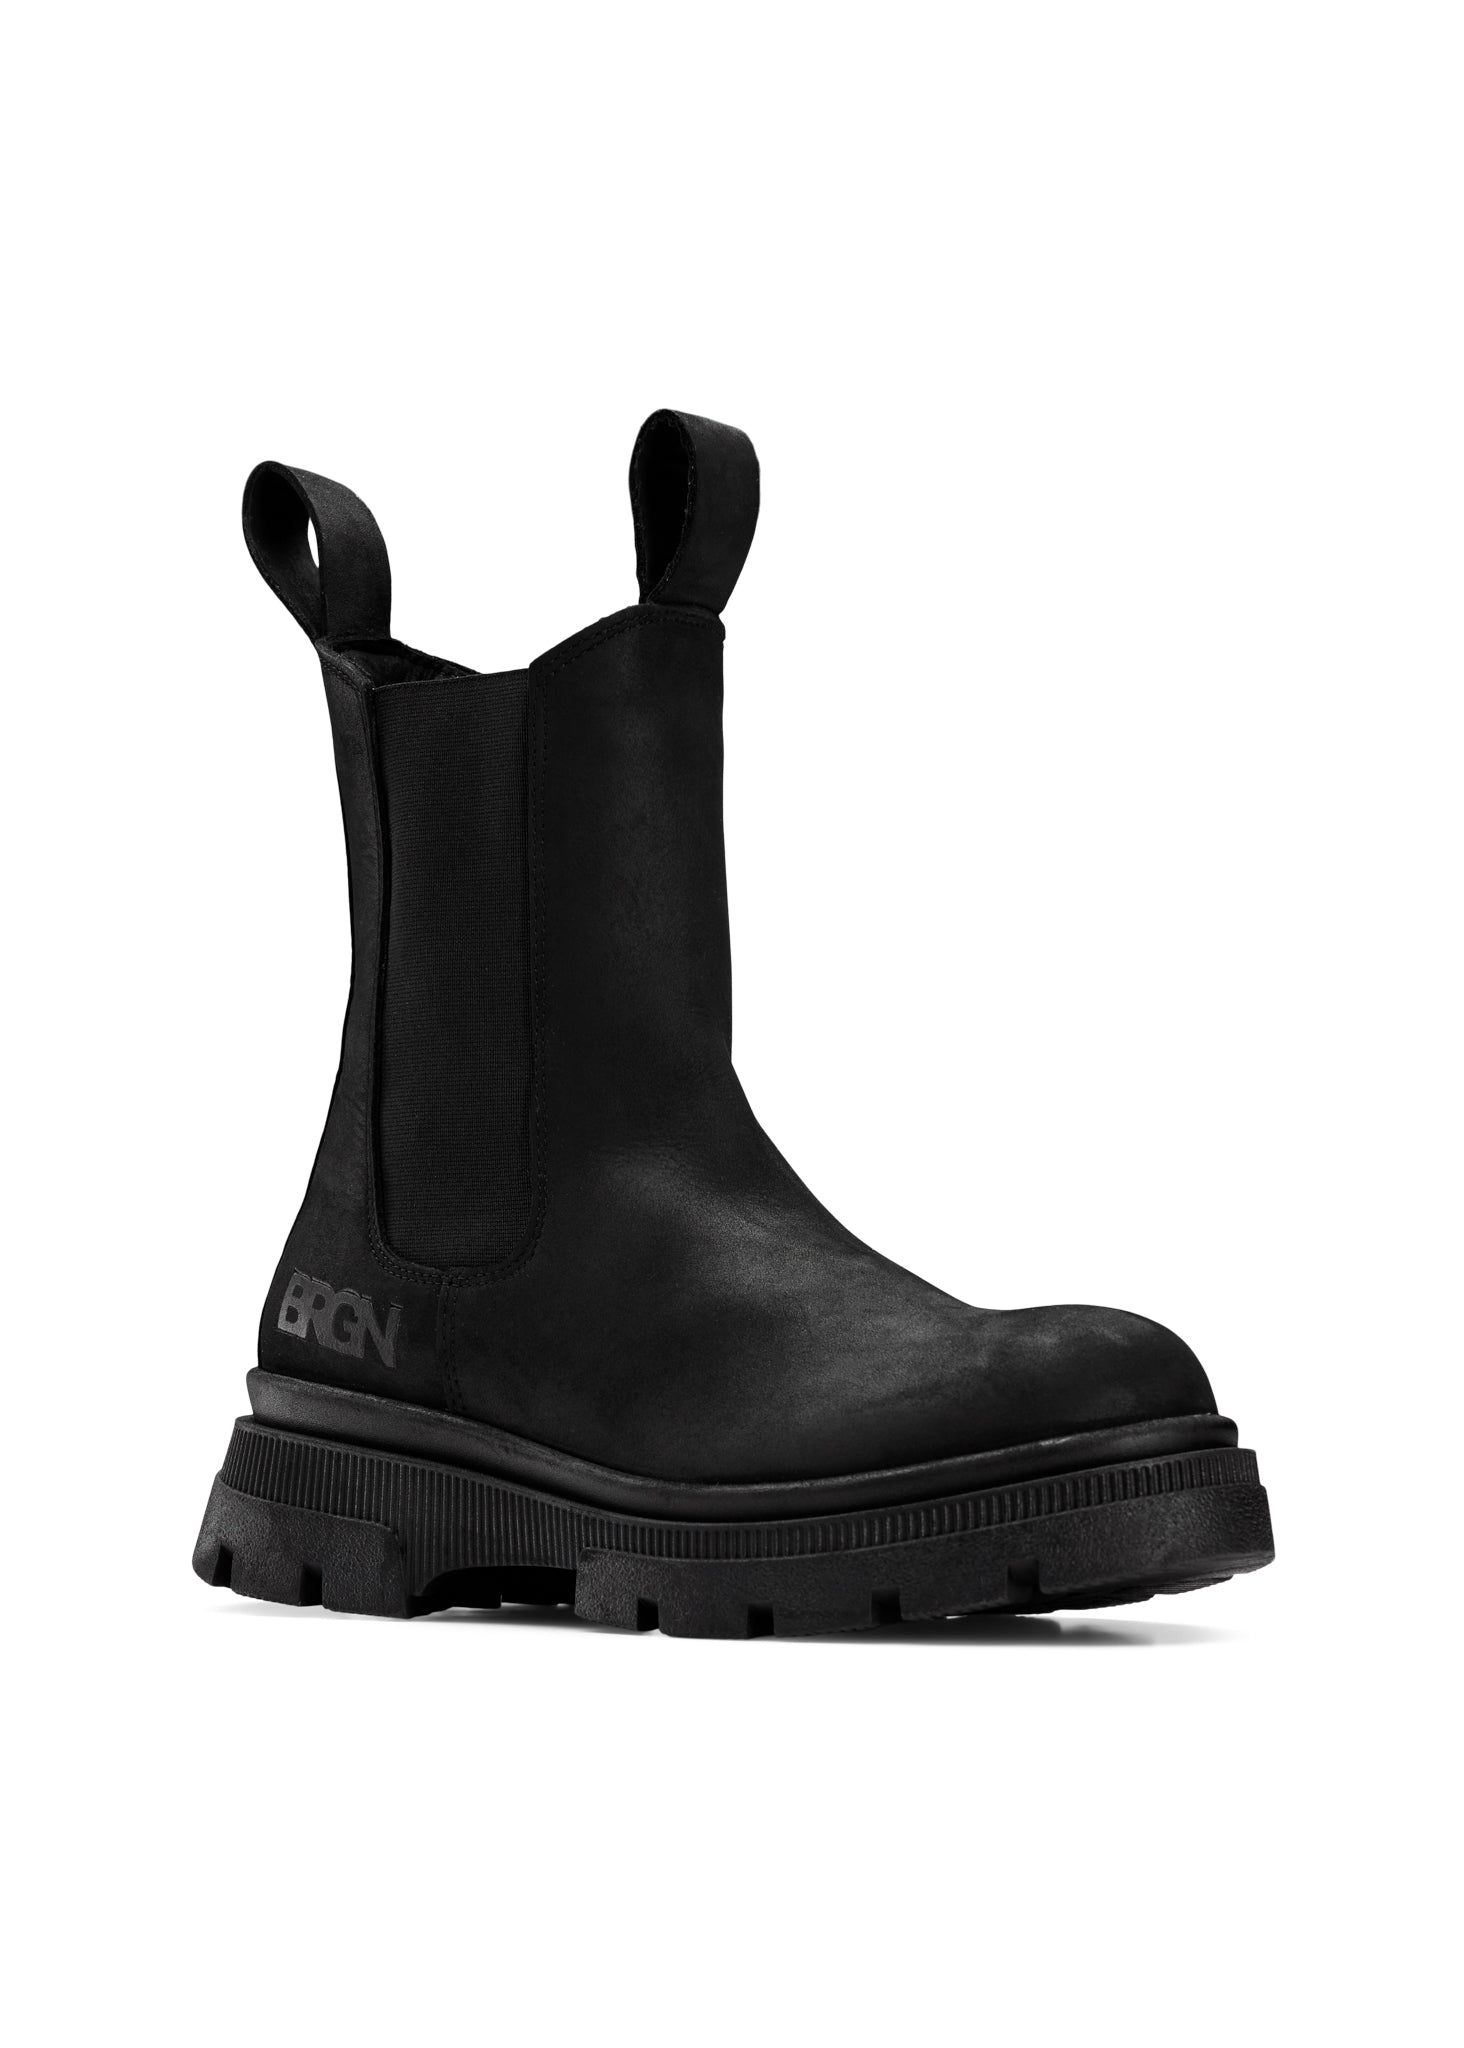 BRGN Chelsea Boot Shoes 095 New Black